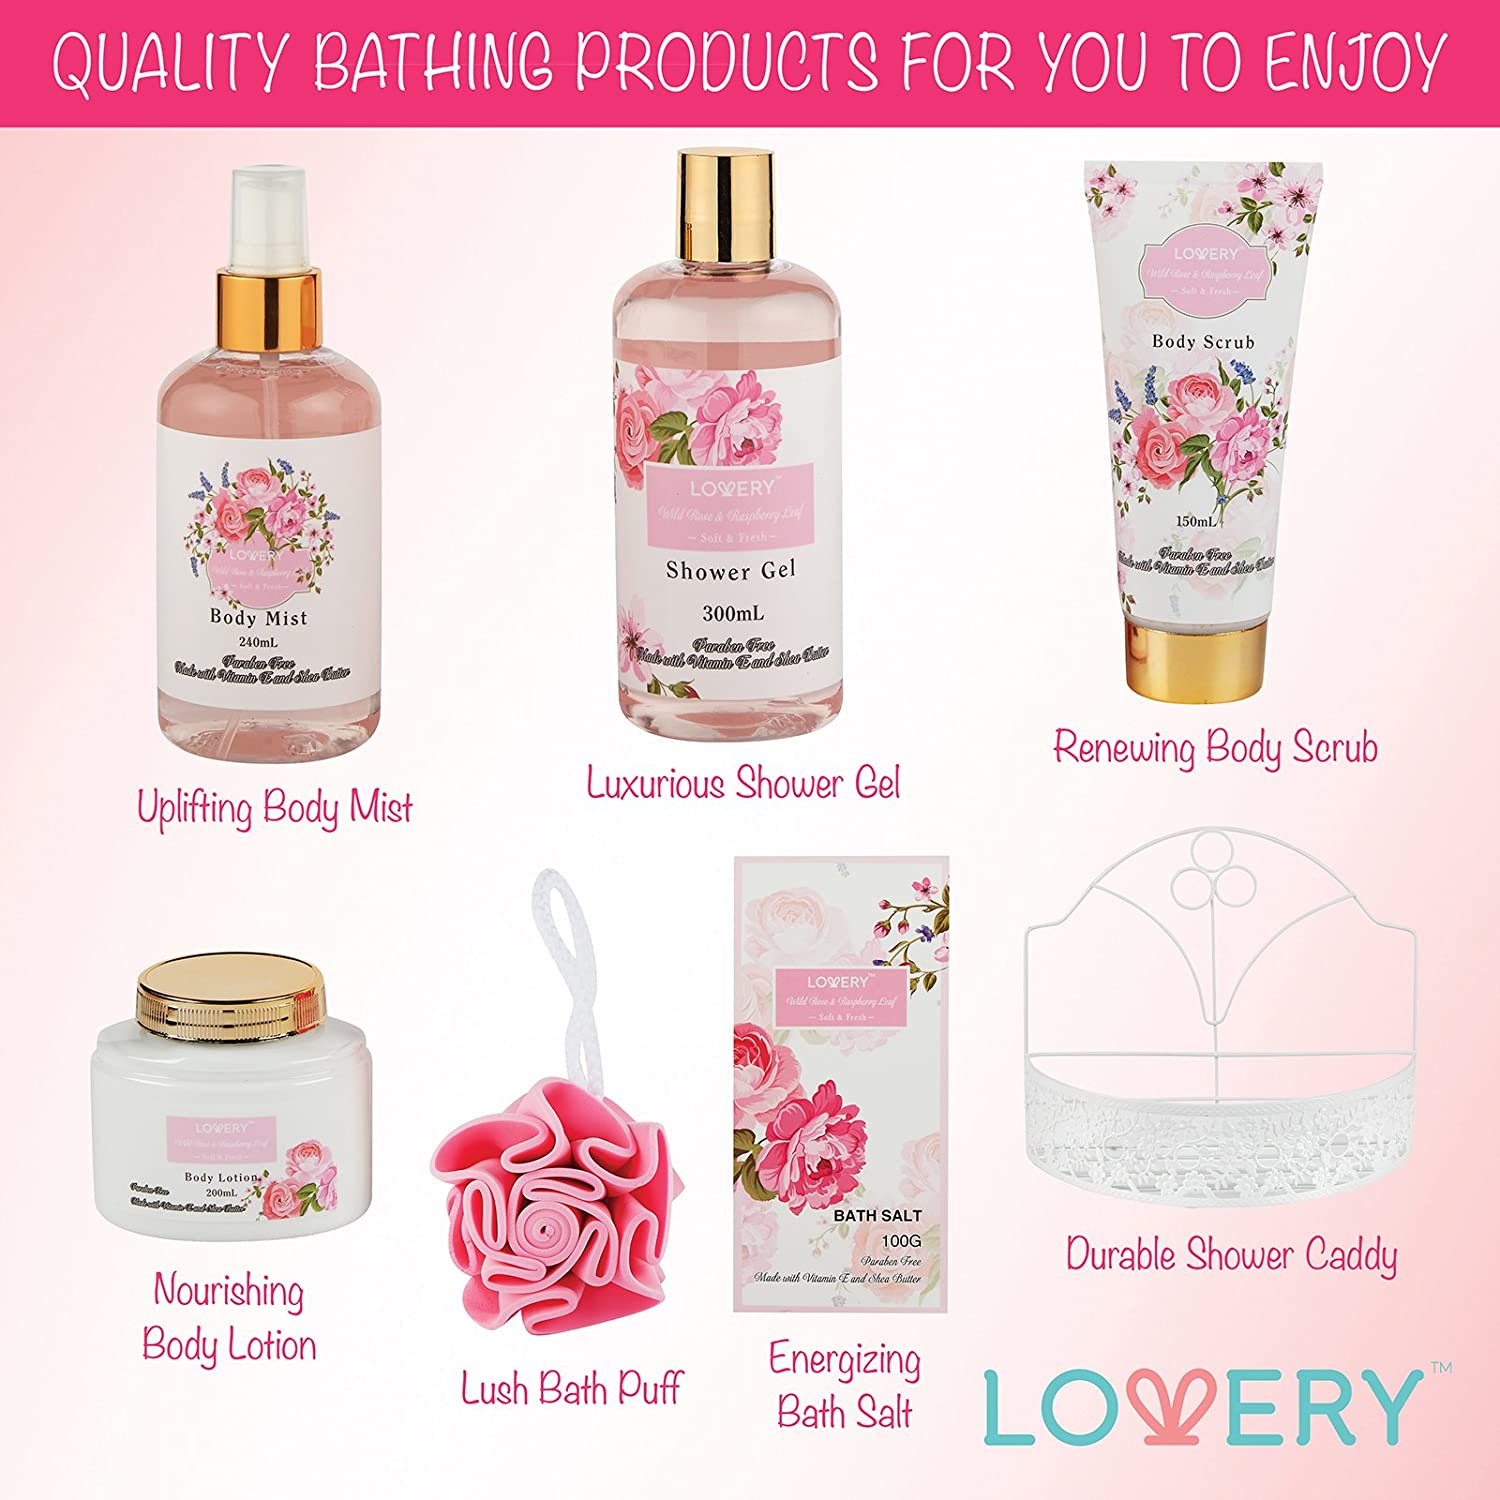 lovery Wild Rose Bath Gift Set, Wild Rose Bath Gift Set, Raspberry & Rose Bath Set, Metal shower caddy, Luxury bath kit items, Wild Rose spa essentials, Raspberry Leaf bath products, Complete spa set view, Lovery's spa kit display, Rose-infused spa products, Bath set with caddy, Elegant bath gift contents